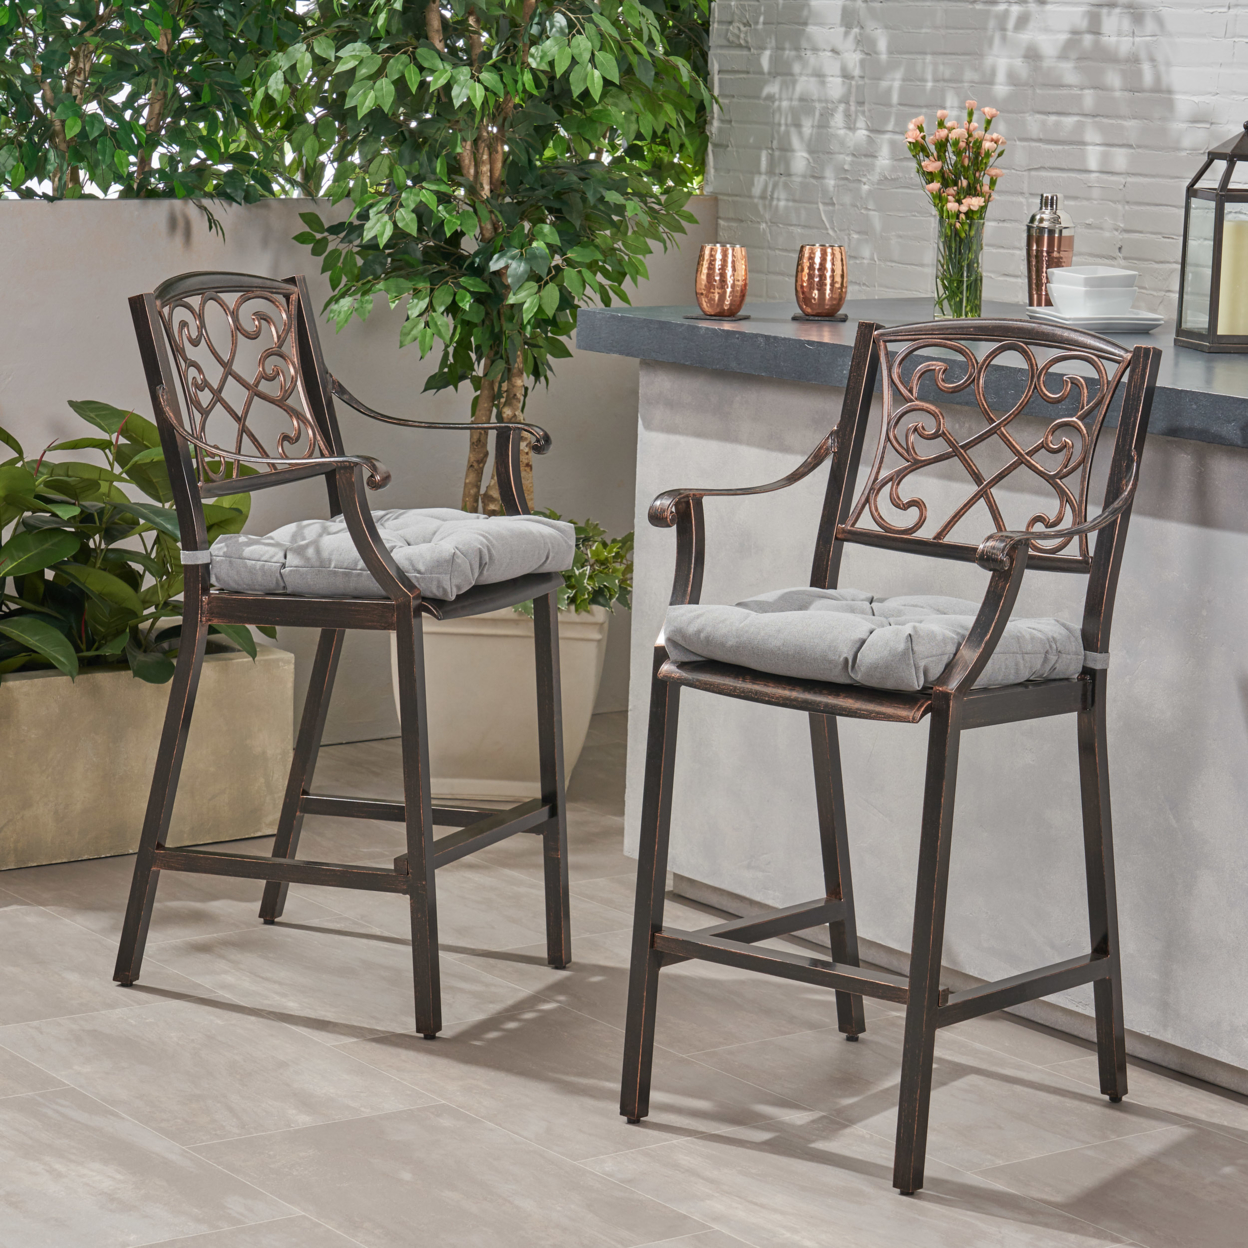 Megan Outdoor Barstool With Cushion (Set Of 2) - Shiny Copper + Charcoal